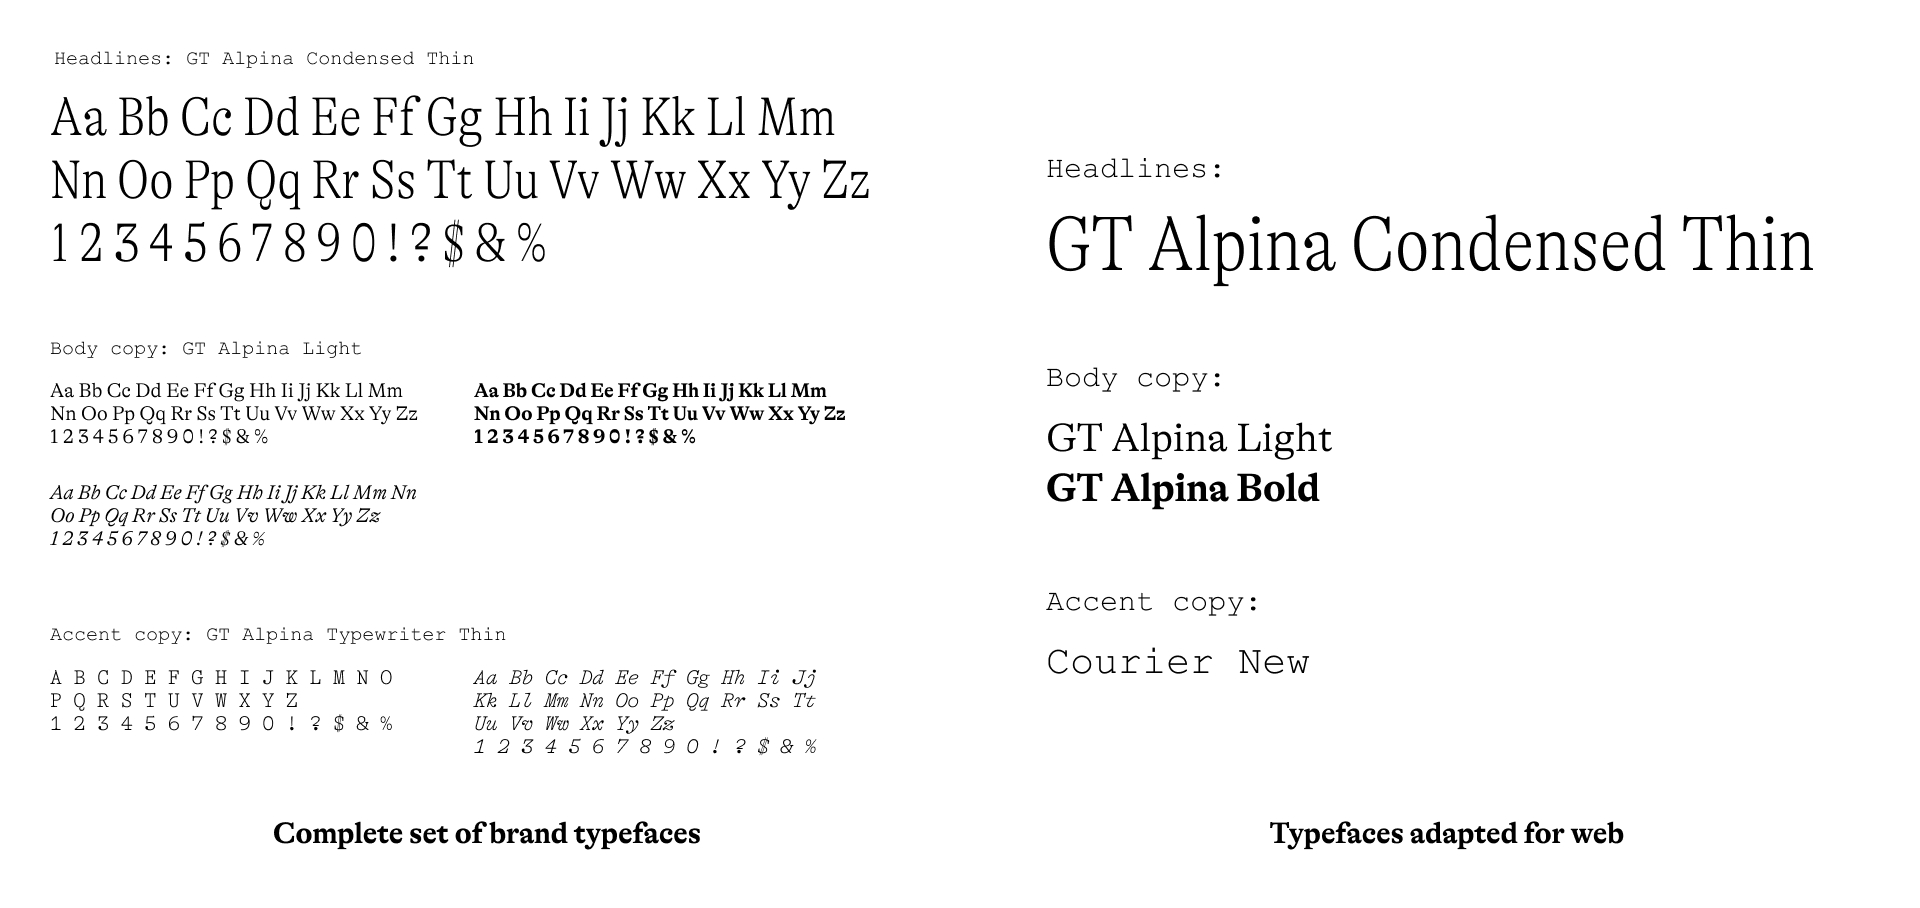 Comparing six weights of GT Alpina for print and marketing to three weights plus Courier New for web.